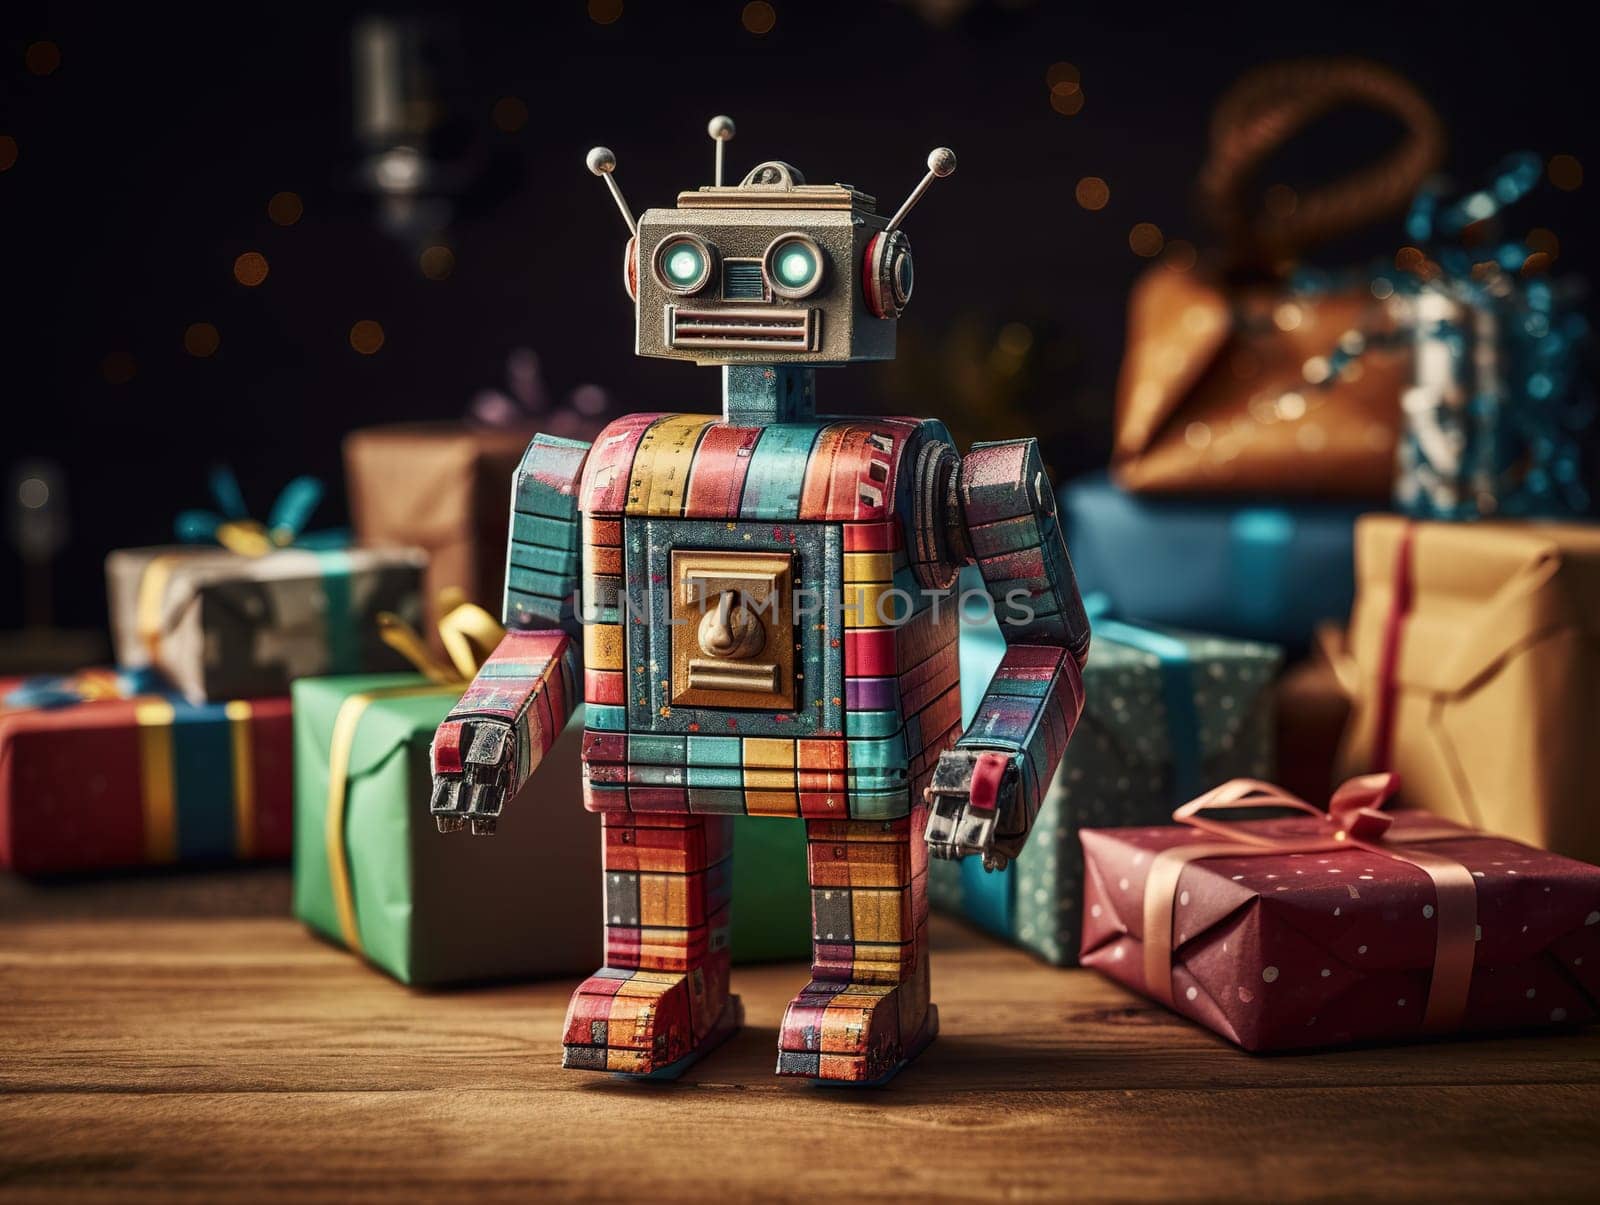 Illustration Of Old-Fashioned Colorful Robot Among Christmas Gifts by tan4ikk1